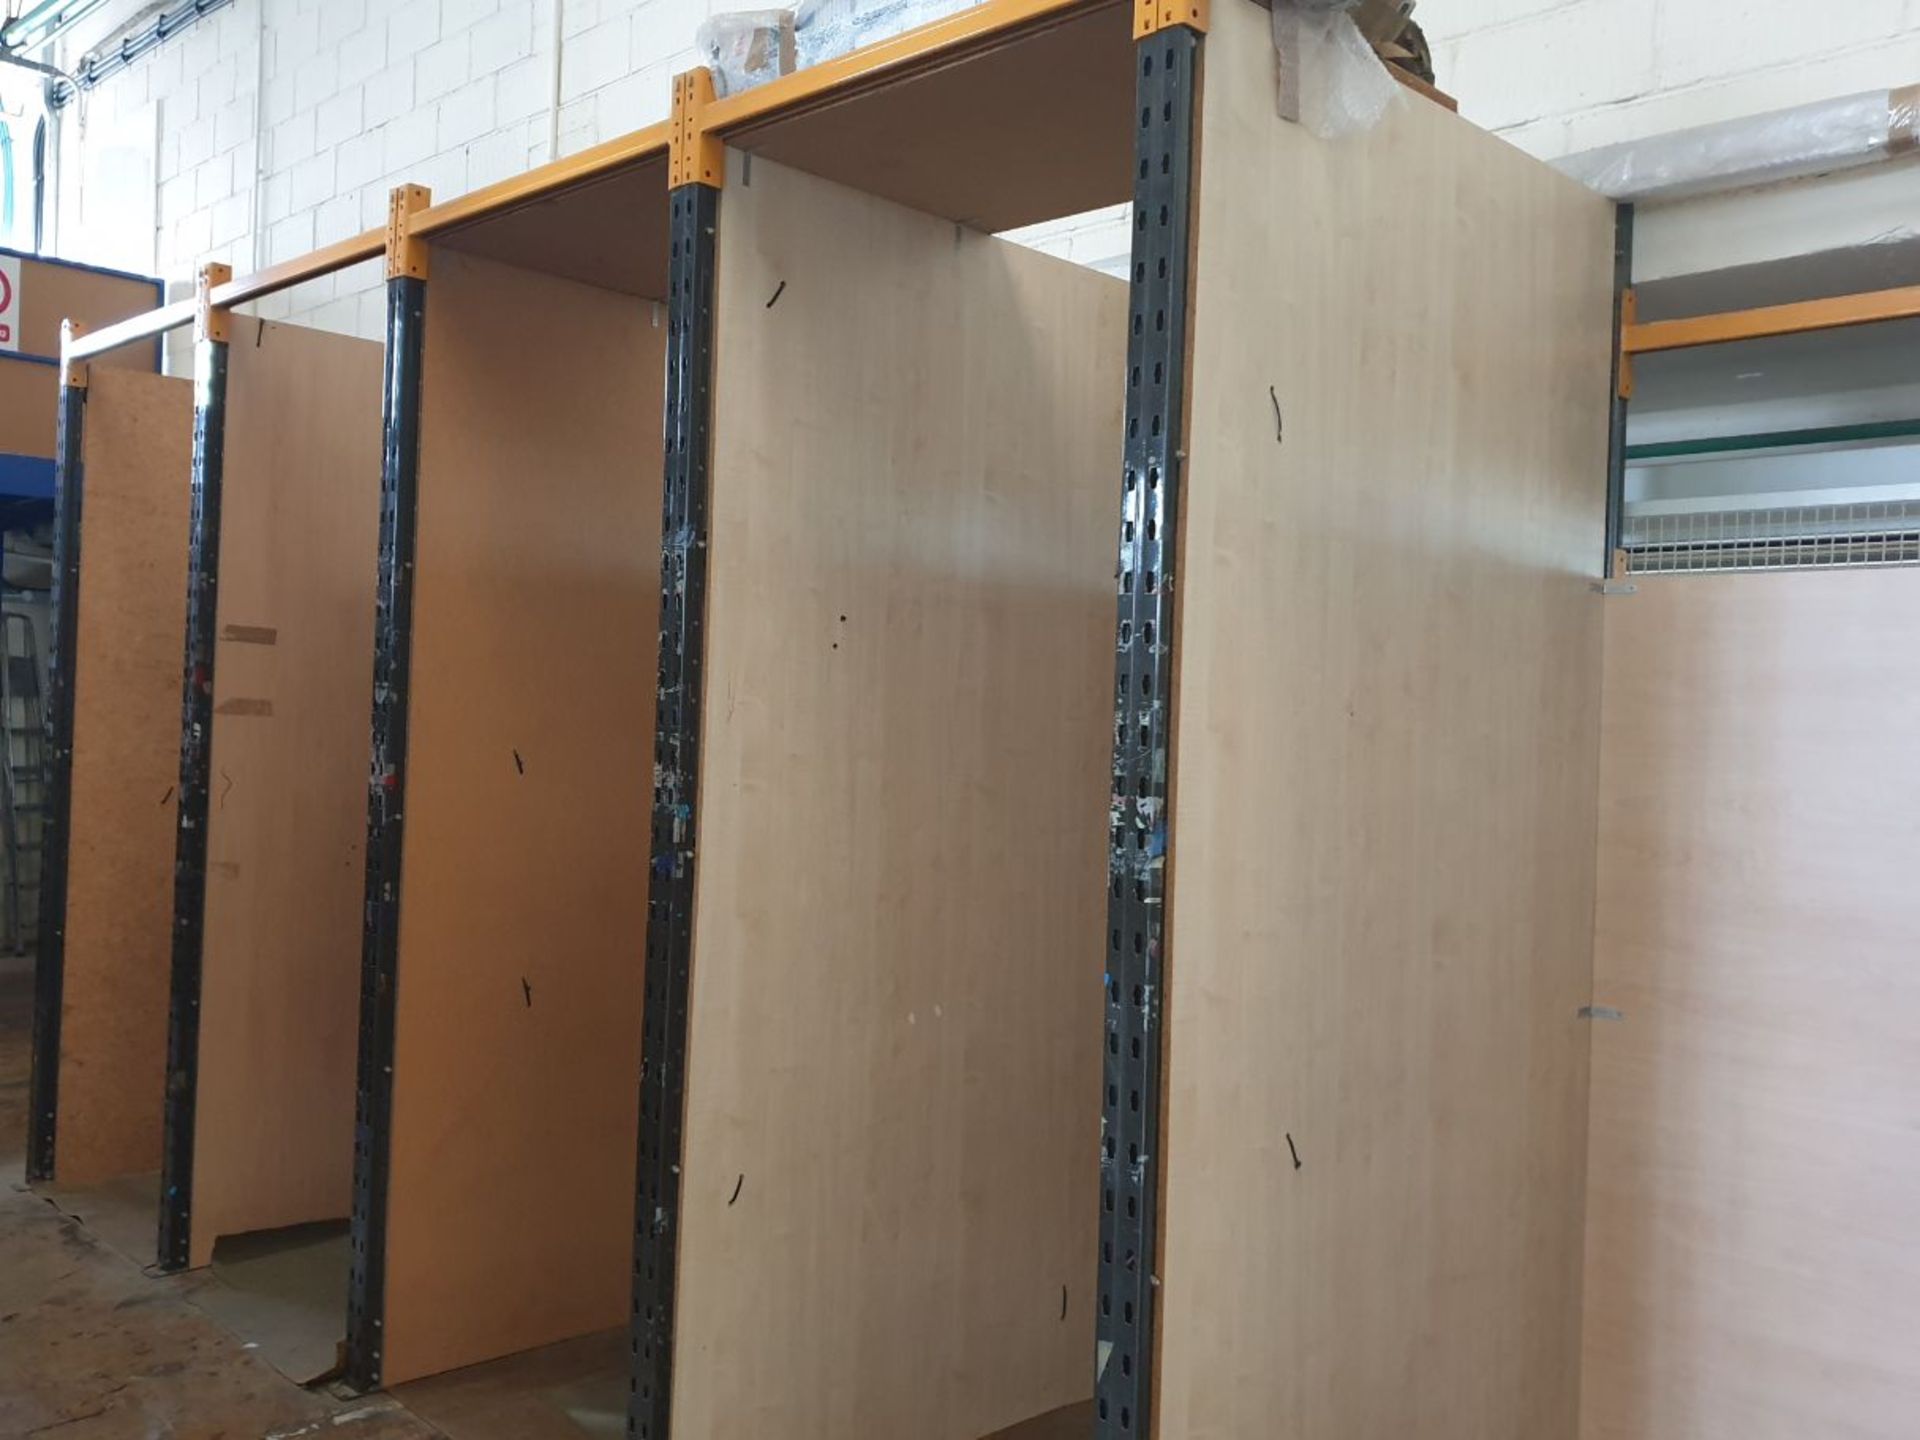 Seven Bays of Single Tier Racking with Wooden Board Dividers (Located Skipton, BD23 2QR) Please read